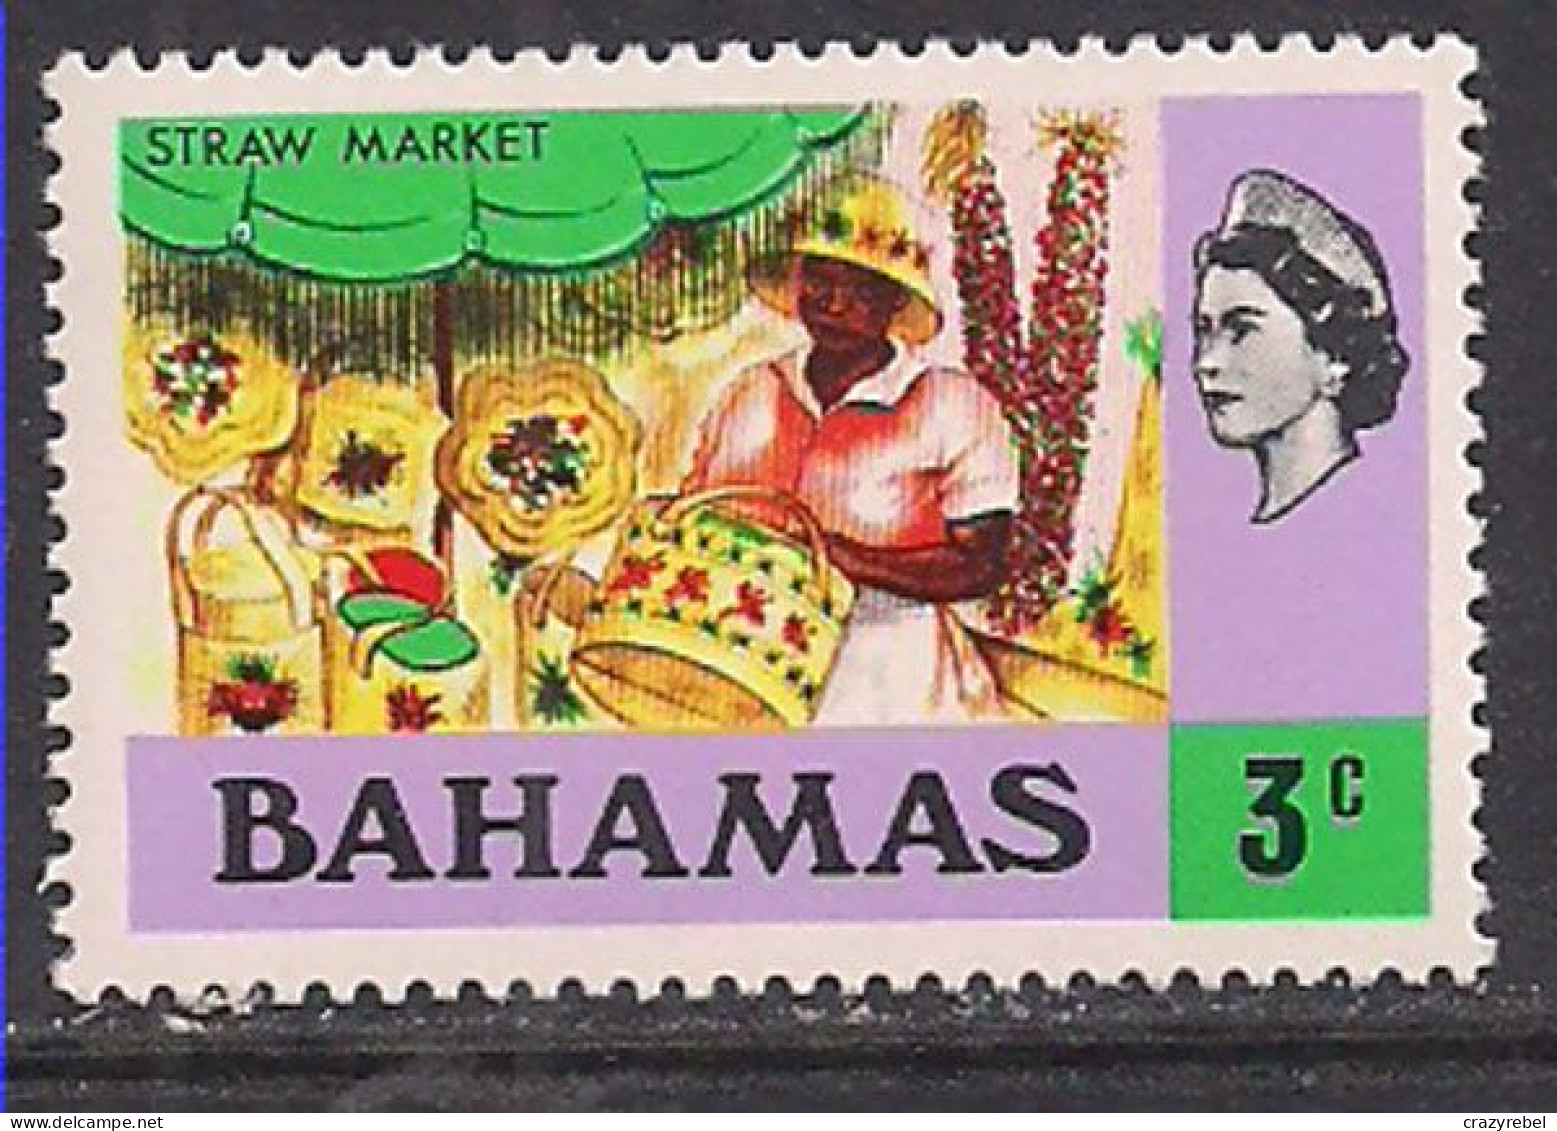 Bahamas 1971 QE2 3c Market SG 361 MNH ( H712 ) - 1963-1973 Ministerial Government